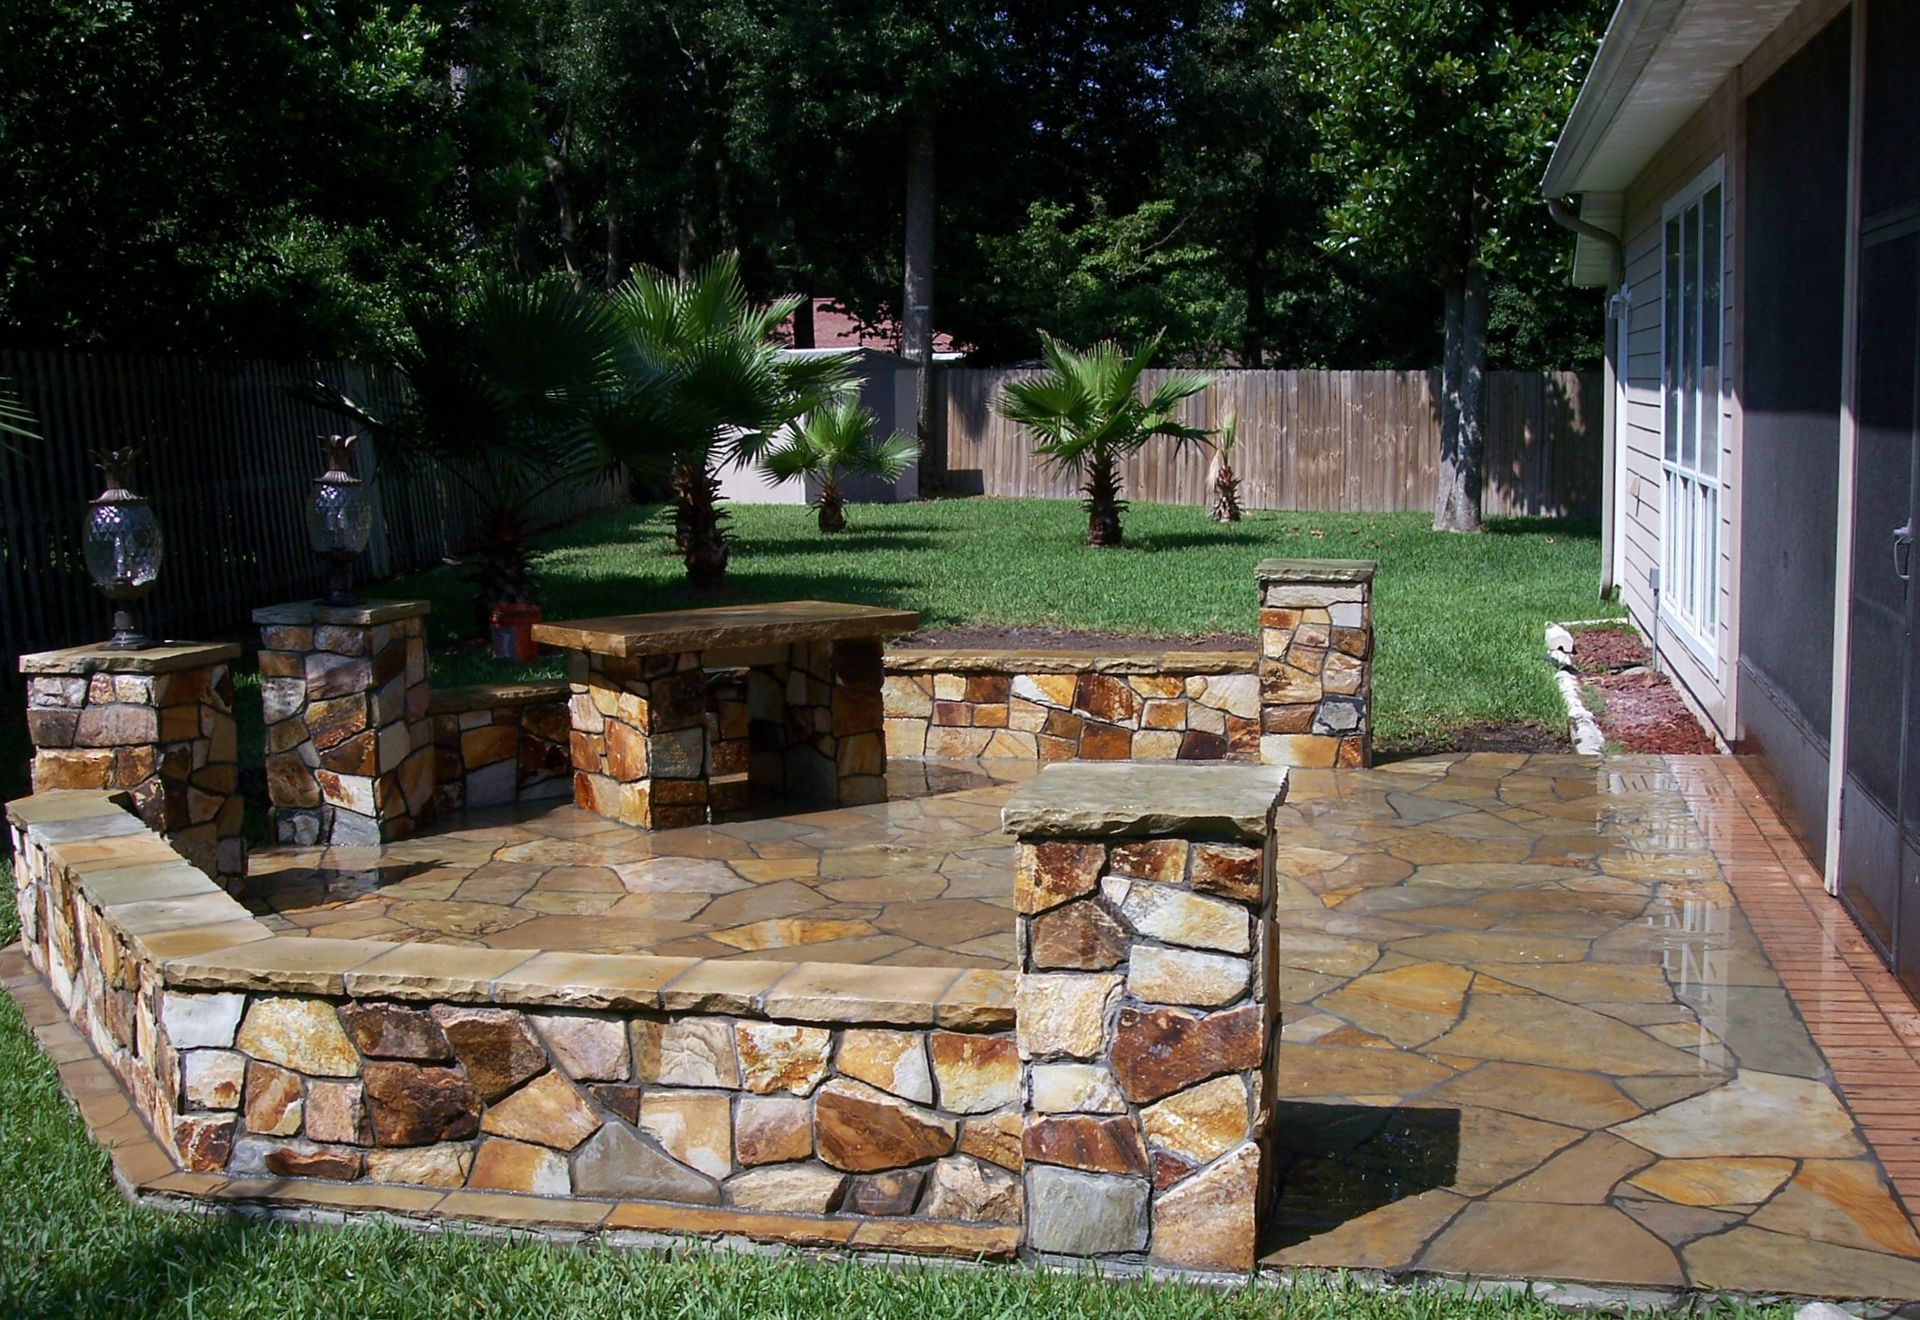 flagstone patio, flagstone steps, stone wall, stone retaining wall, stone baluster, hardscape, paver, stone pavers, stone, decorative stone, patio, paver patio, stone paver patio, walkway, paver walkway, stone walkway, walkway stones, stone paver walkway, garden stones, walkway stones, garden walkway, paver landscaping, stone steps, paver steps, pool deck, paver pool deck, paver pool decking, pool coping, natural stone, stone, stacked stone, veneer, stone veneer, flagstone, bluestone, thermal bluestone, spa design, pool deck design, outdoor kitchen, summer kitchen, fire pit, firepit, sitting wall, pergola, hand-made pergola, seating area, outdoor living, outdoor entertaining, paver contractor, paver design, paver install, paver installation, paver expert, paver experts, warranty, labor warranty, expert installation, expert install, licensed and insured, licensed, insured, licensed insured, award winning designs, Angie's List Super Service Award, Angie's List Award, customer reviews, excellent reputation, reputation, fireplace, fireplace renovation, stone fireplace, fireplace veneer, fireplace reconstruction, before and after pictures, years experience, experienced, Jacksonville, Ponte Vedra, Nocatee, Fleming Island, Queens Harbor, St. Johns, Fruit Cove, St. Augustine, Jacksonville pavers, paver driveway Jacksonville, Jacksonville paver driveway, Jacksonville driveway, paver patio Jacksonville, patio Jacksonville, Jacksonville paver patio, Jacksonville patio, Ponte Vedra pavers, paver driveway Ponte Vedra, driveway Ponte Vedra, Ponte Vedra paver driveway, Ponte Vedra driveway, paver patio Ponte Vedra, patio Ponte Vedra, Ponte Vedra paver patio, Ponte Vedra patio, Nocatee pavers, driveway Nocatee, paver driveway Nocatee, Nocatee driveway, Nocatee paver driveway, paver patio Nocatee, patio Nocatee, Nocatee paver patio, Nocatee patio, Sawgrass pavers, Sawgrass paver driveway, Sawgrass driveway, driveway Sawgrass, paver driveway Sawgrass, paver patio Sawgrass, patio Sawgrass, Sawgrass patio, Sawgrass paver patio, Fleming Island pavers, Fleming Island paver driveway, paver driveway Fleming Island, Fleming Island driveway, driveway Fleming Island, paver patio Fleming Island, Fleming Island paver patio, patio Fleming Island, Fleming Island patio, Queens Harbor pavers, paver driveway Queens Harbor, Queens Harbor paver driveway, Queens Harbor driveway, driveway Queens Harbor, paver patio Queens Harbor, Queens Harbor paver patio, patio Queens Harbor, Queens Harbor patio, St. Johns pavers, St. Johns paver driveway, paver driveway St. Johns, St. Johns driveway, driveway St. Johns, St. Johns paver patio, paver patio St. Johns, patio St. Johns, St. Johns patio, Fruit Cove pavers, paver driveway Fruit Cove, Fruit Cove paver driveway, driveway Fruit Cove, Fruit Cove driveway, Fruit Cove paver patio, paver patio Fruit Cove, patio Fruit Cove, Fruit Cove patio, St. Augustine pavers, paver driveway St. Augustine, St. Augustine paver driveway, driveway St. Augustine, St. Augustine driveway, St. Augustine patio, patio St Augustine, St. Augustine paver patio, paver patio St. Augustine, Mandarin pavers, Mandarin paver driveway, paver driveway Mandarin, driveway Mandarin, Mandarin driveway, paver patio Mandarin, Mandarin paver patio, patio Mandarin, Mandarin patio, balusters, sitting wall, stone bench, stone wall